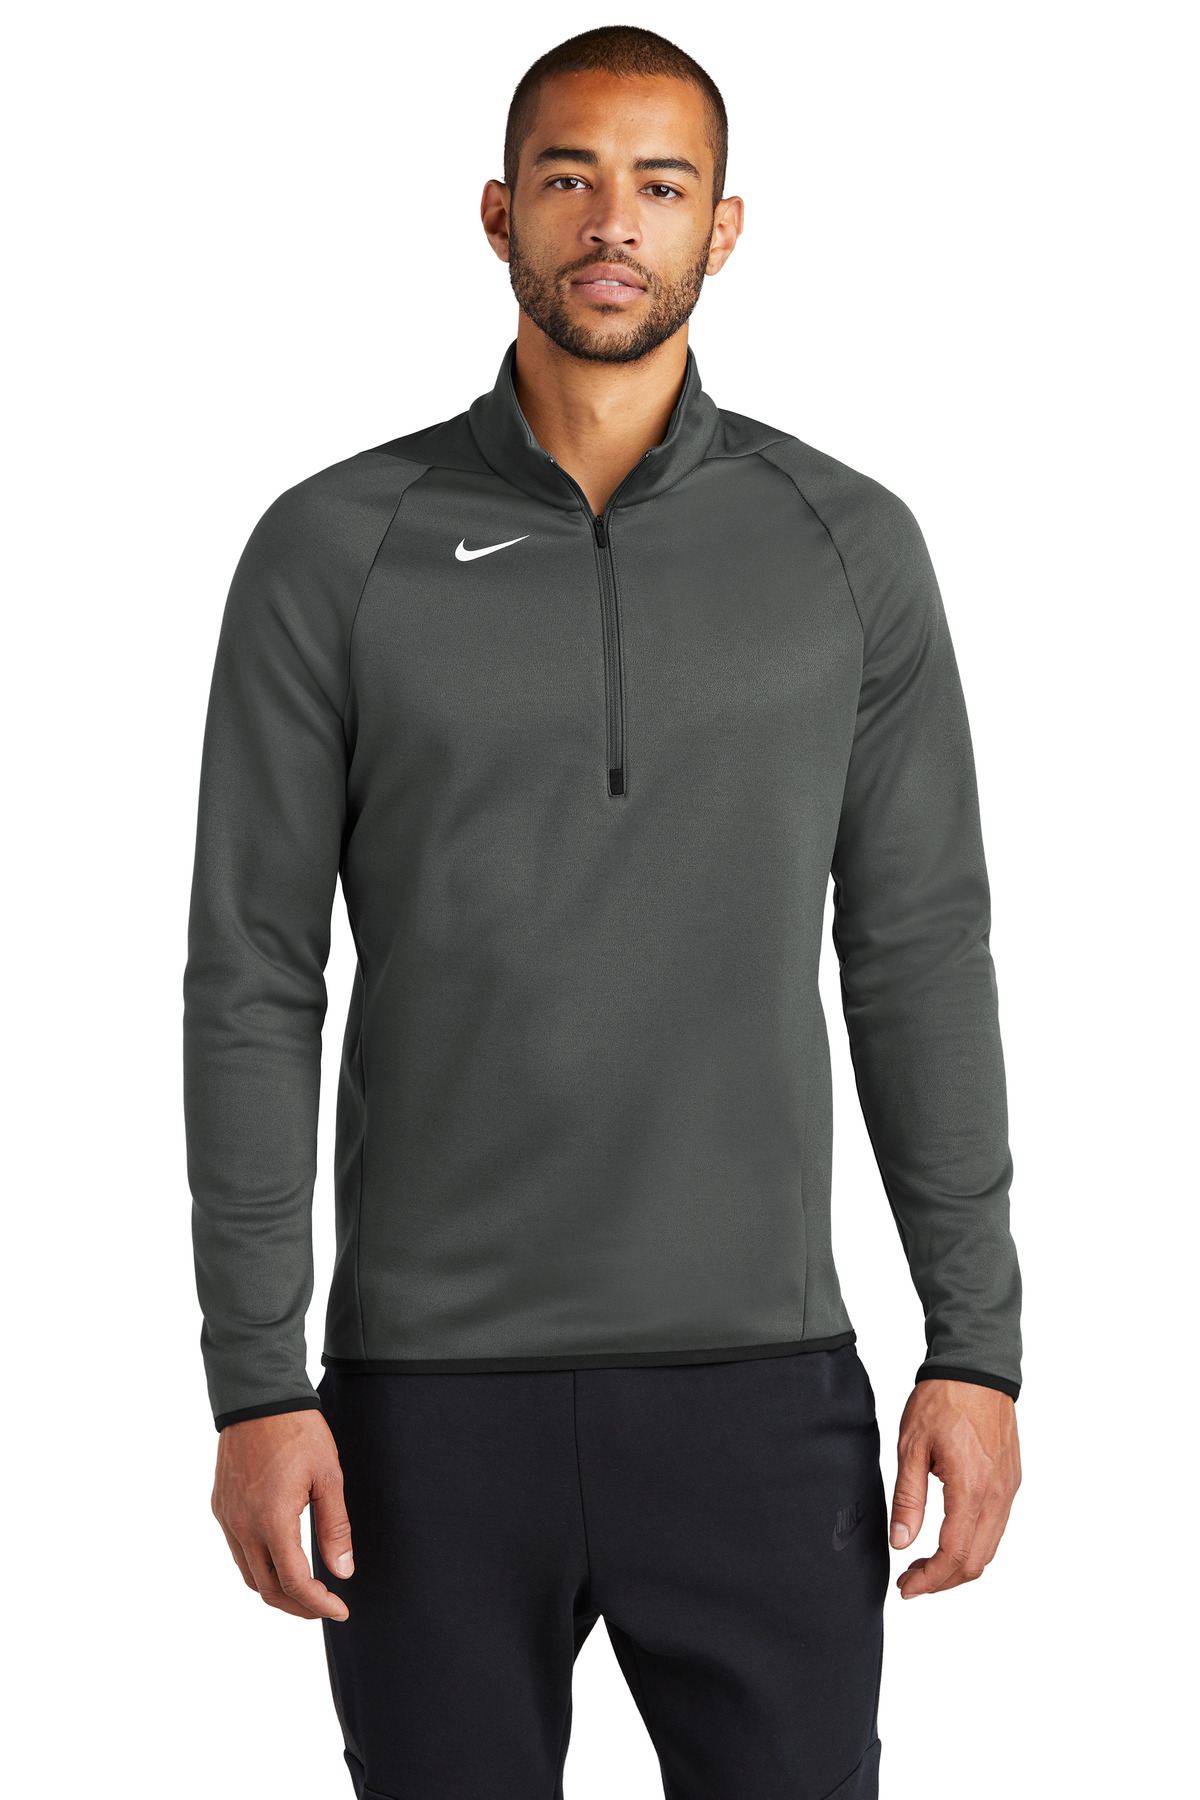 LIMITED EDITION Nike Therma&#45;FIT 1/4&#45;Zip Fleece-Nike